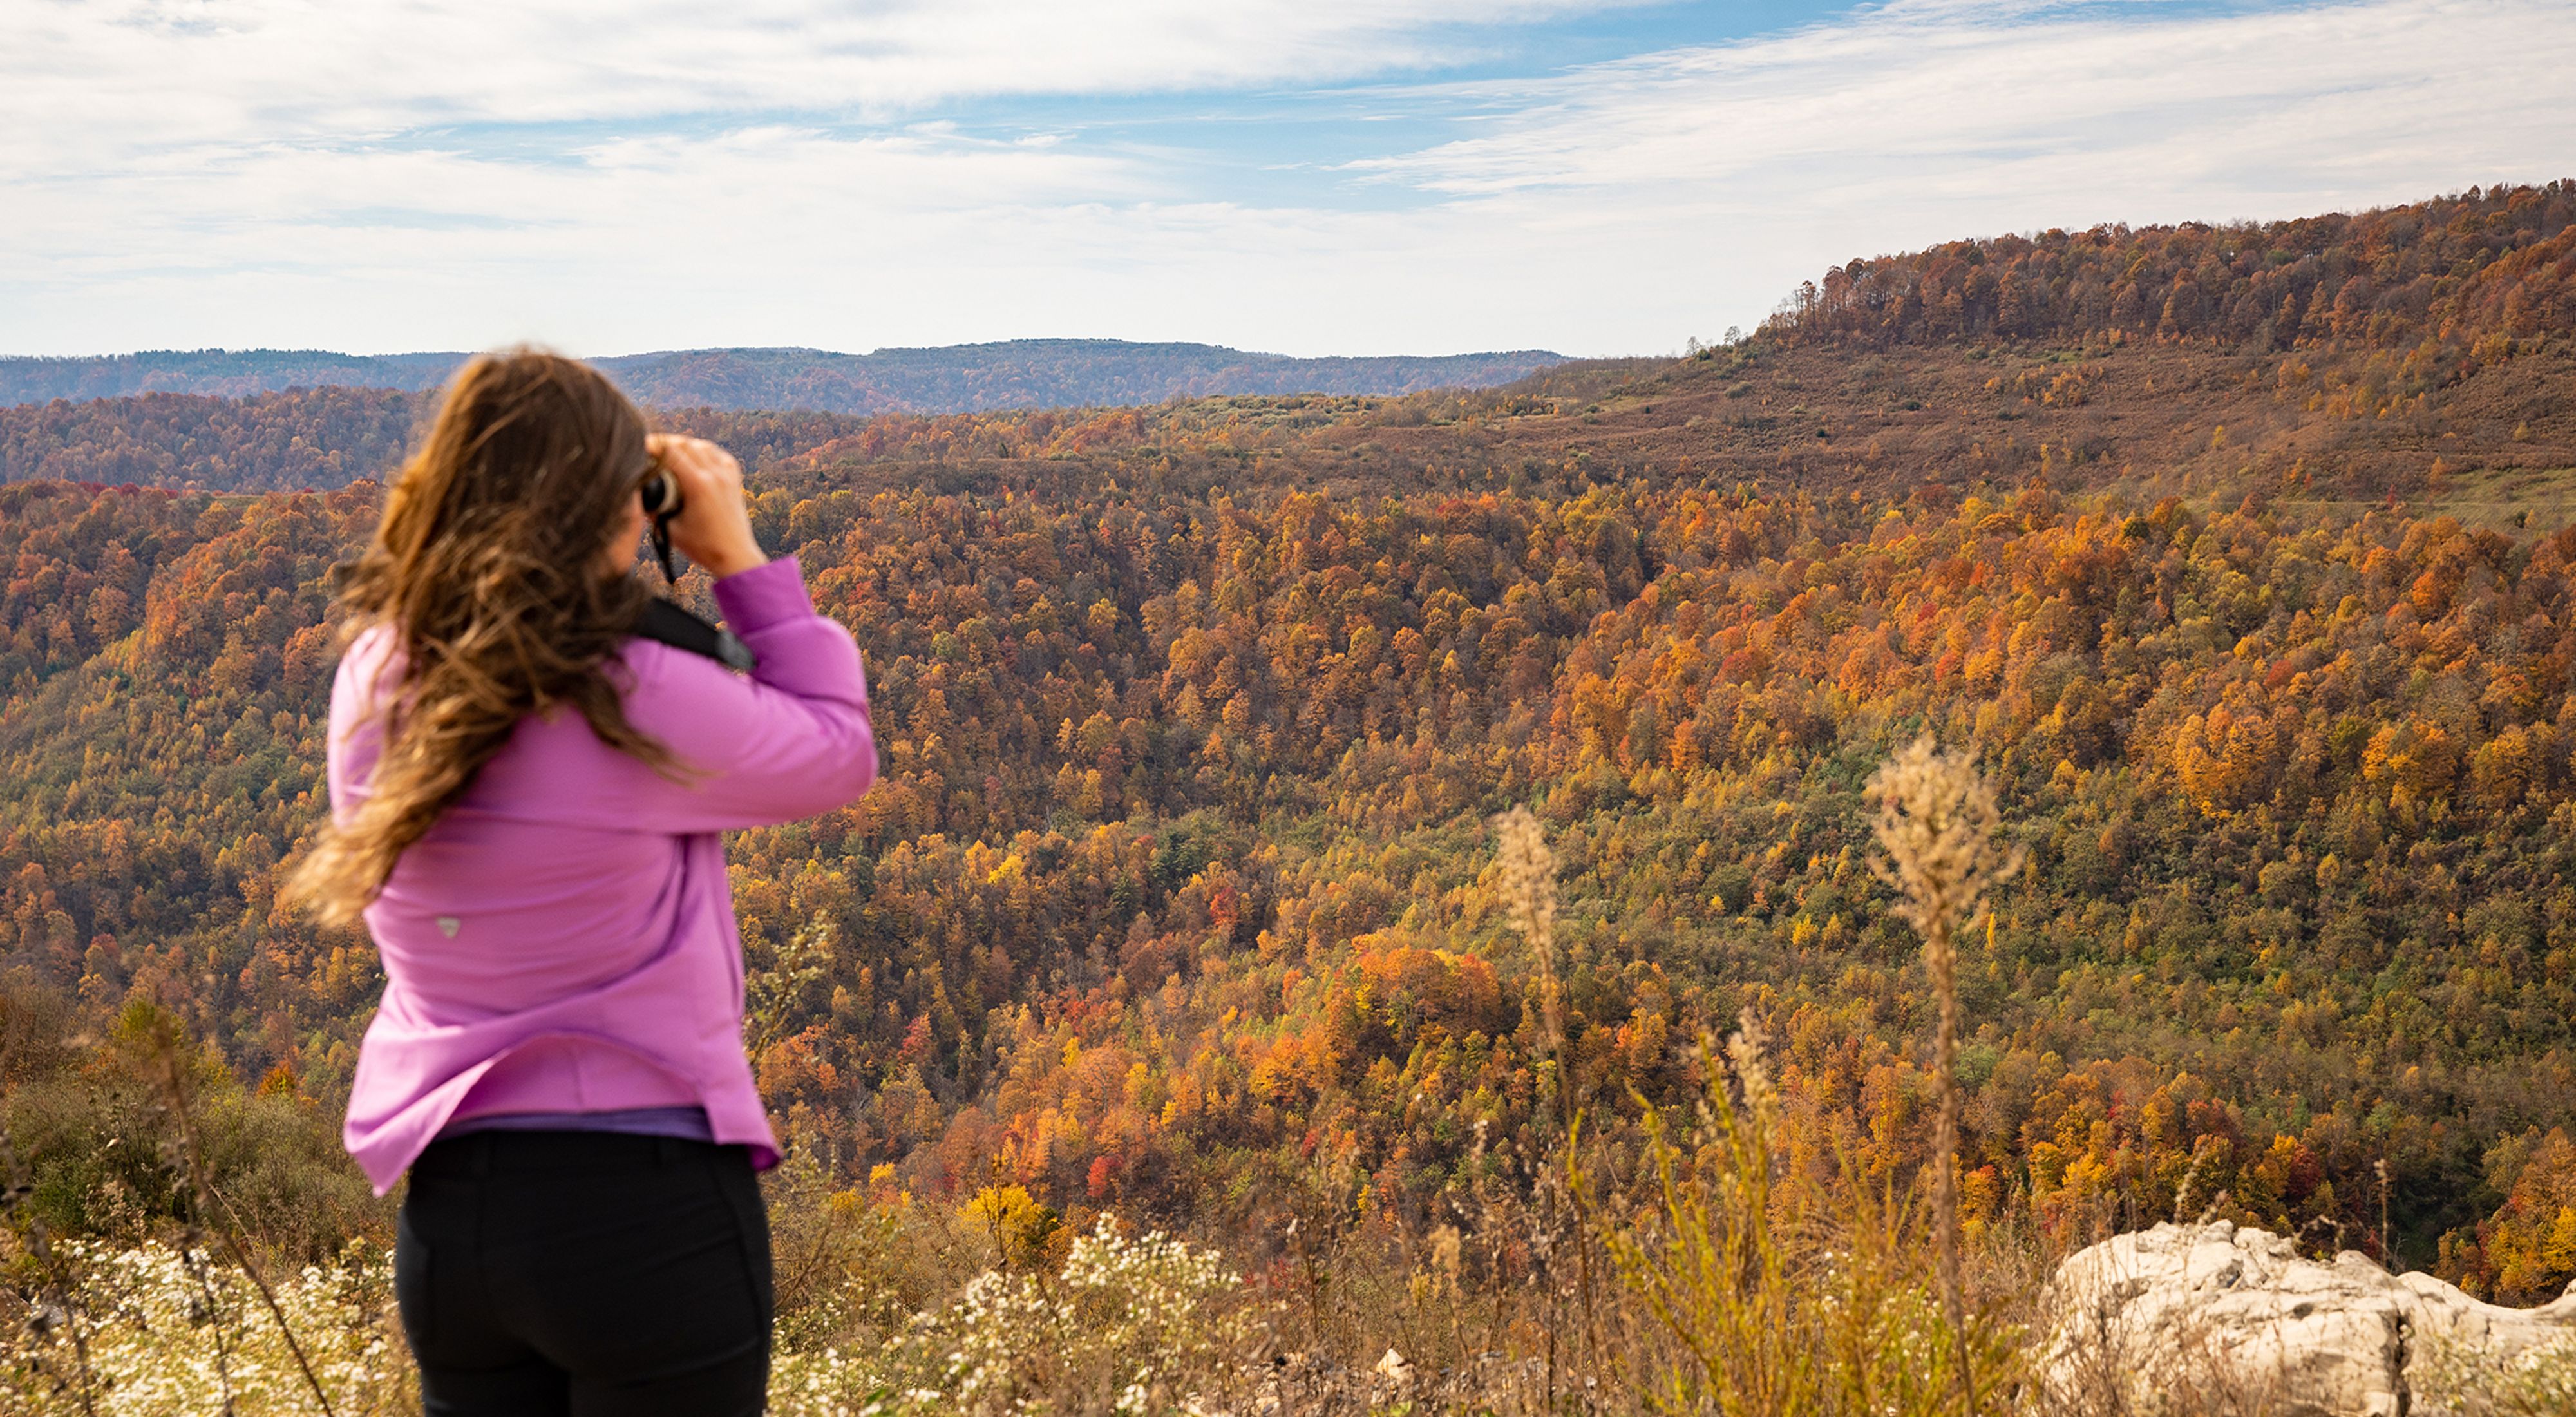 A woman stands on a ridge overlooking a valley and rocky escarpments as she looks through binoculars to behold Kentucky's natural beauty.